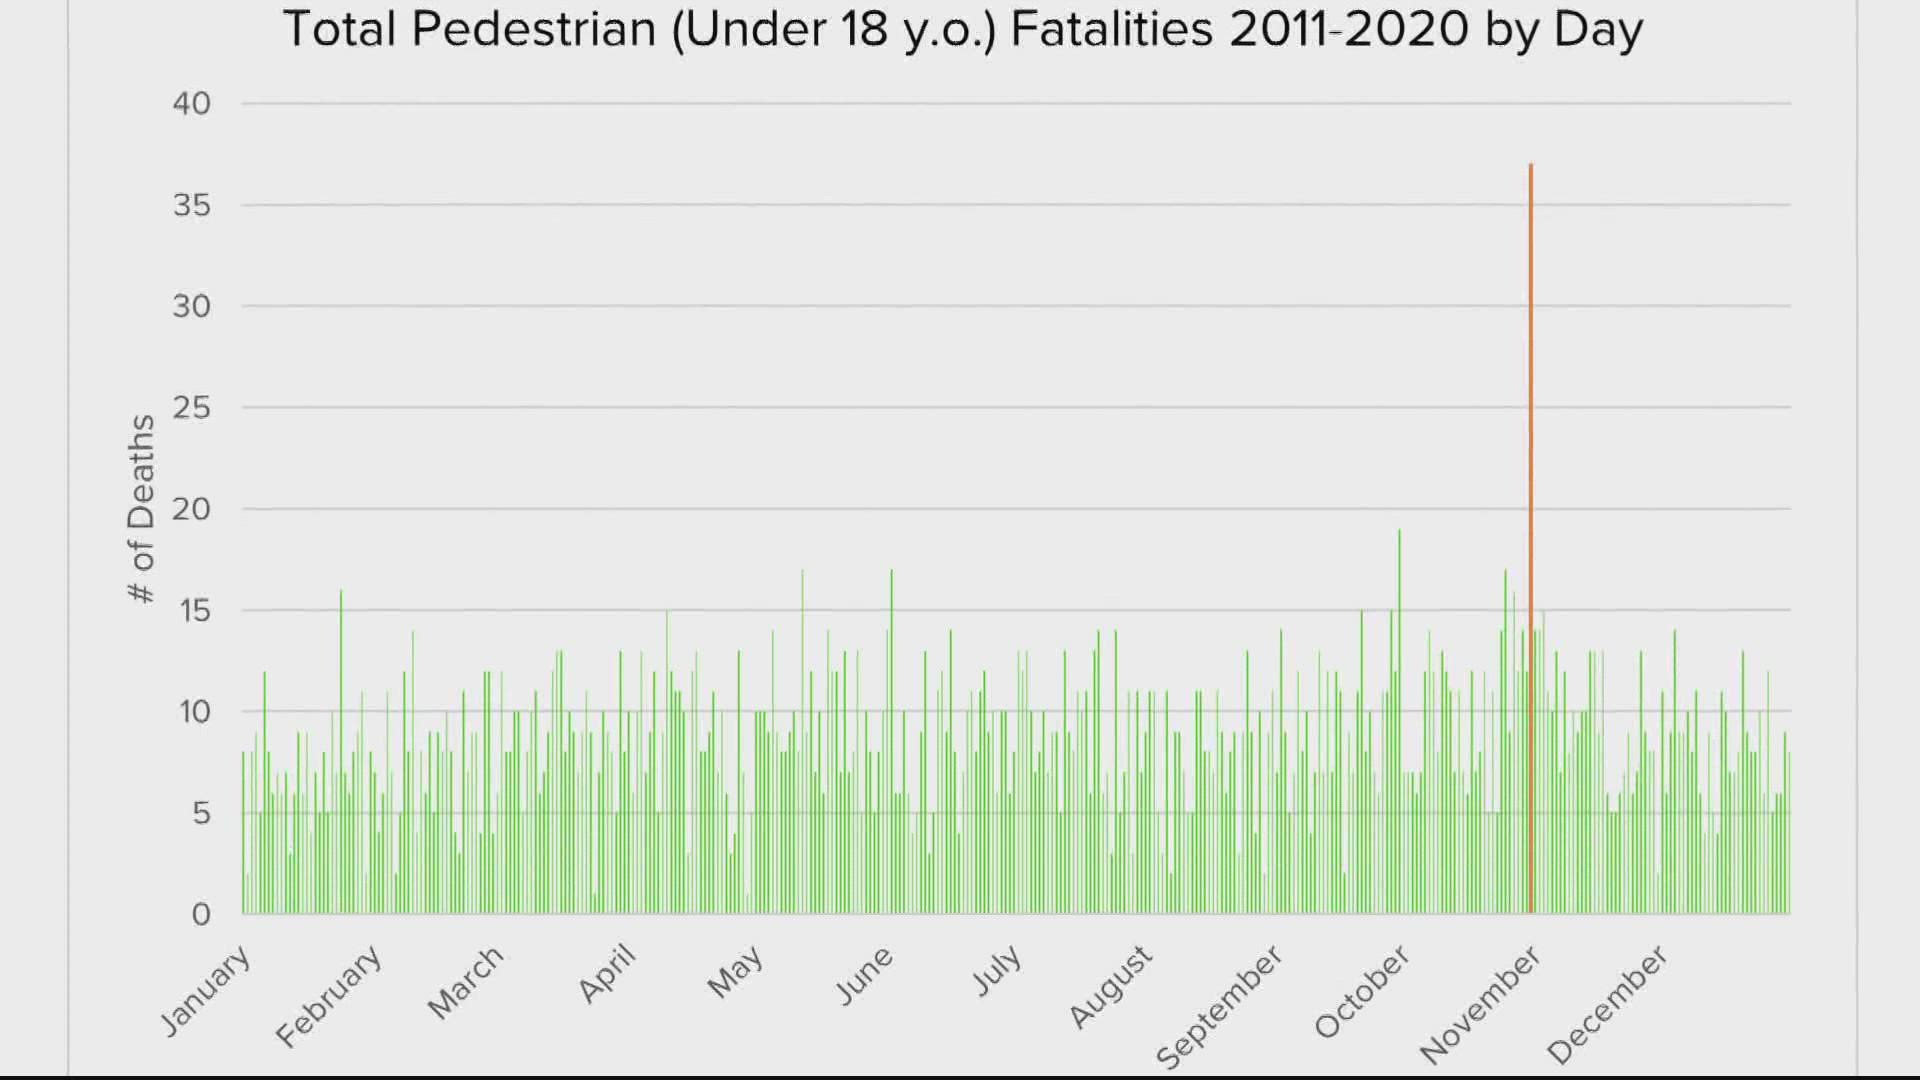 Yes, October 31 is the most dangerous day for pedestrians under the age of 18, according to data from the National Highway Traffic Safety Administration.